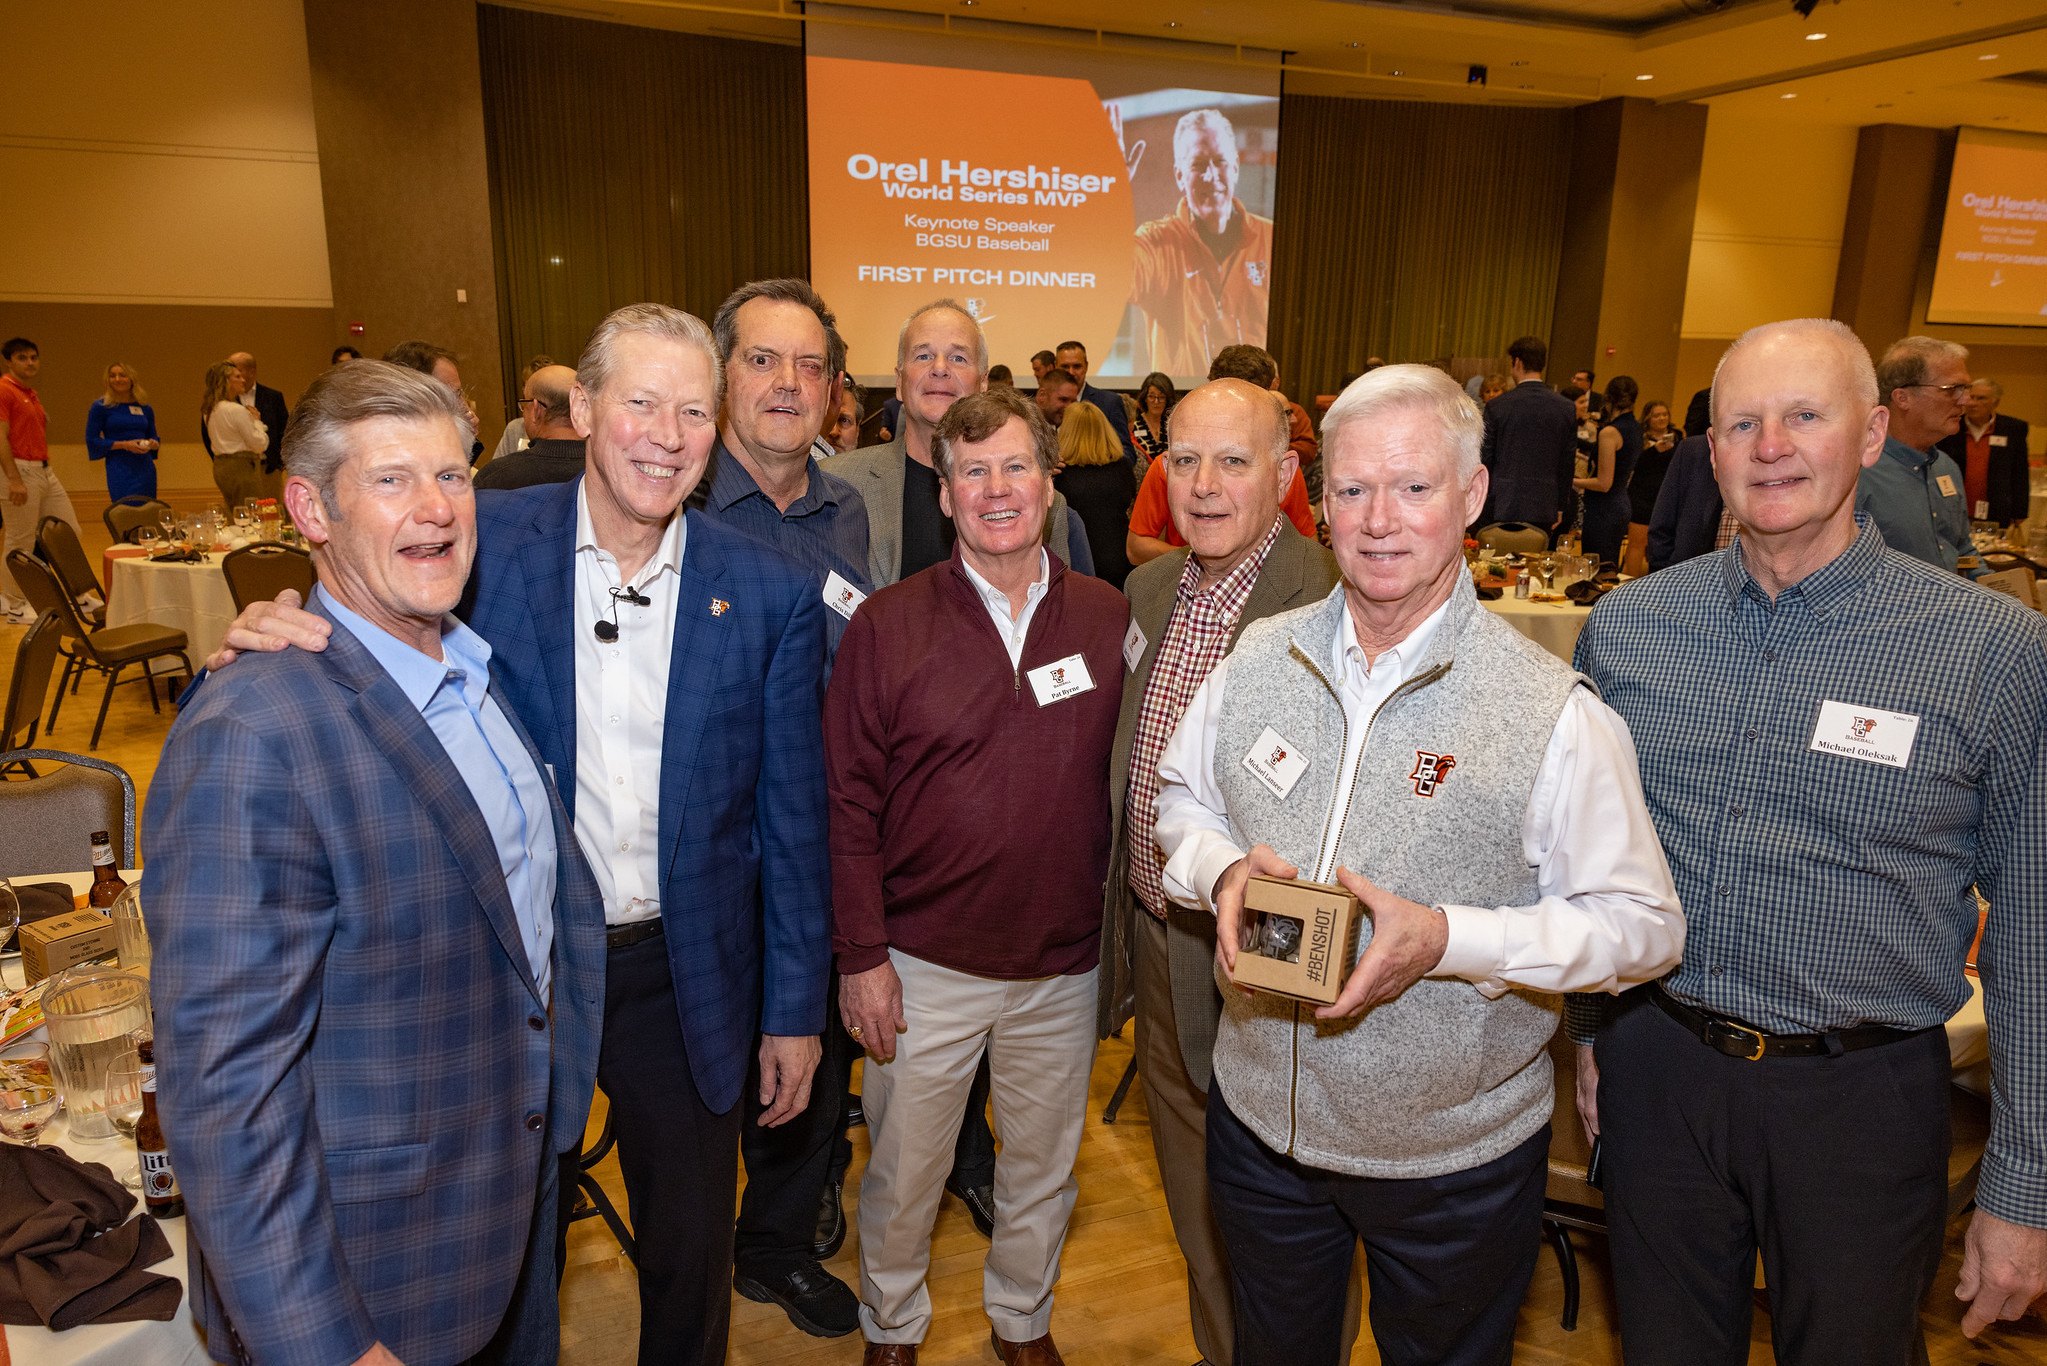 Former BGSU baseball players stand with Orel Hershiser at the Baseball First Pitch dinner.